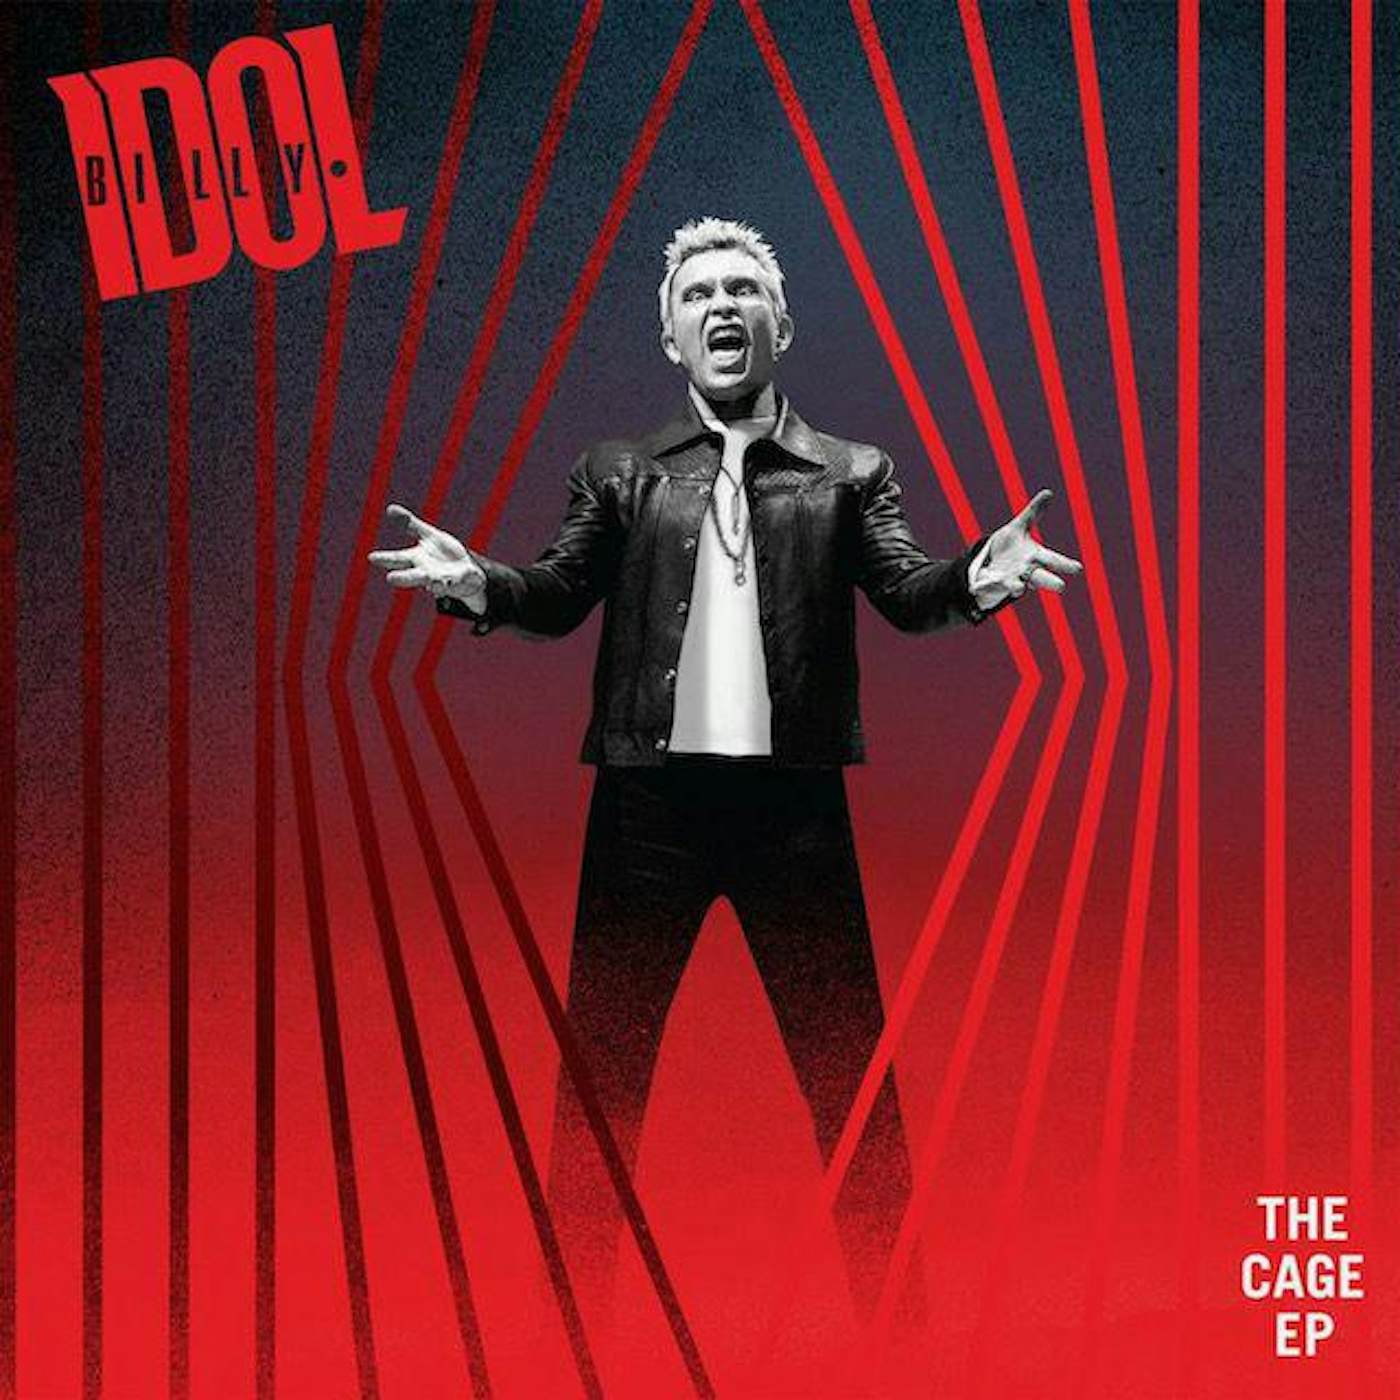 Billy Idol The Cage Vinyl Record